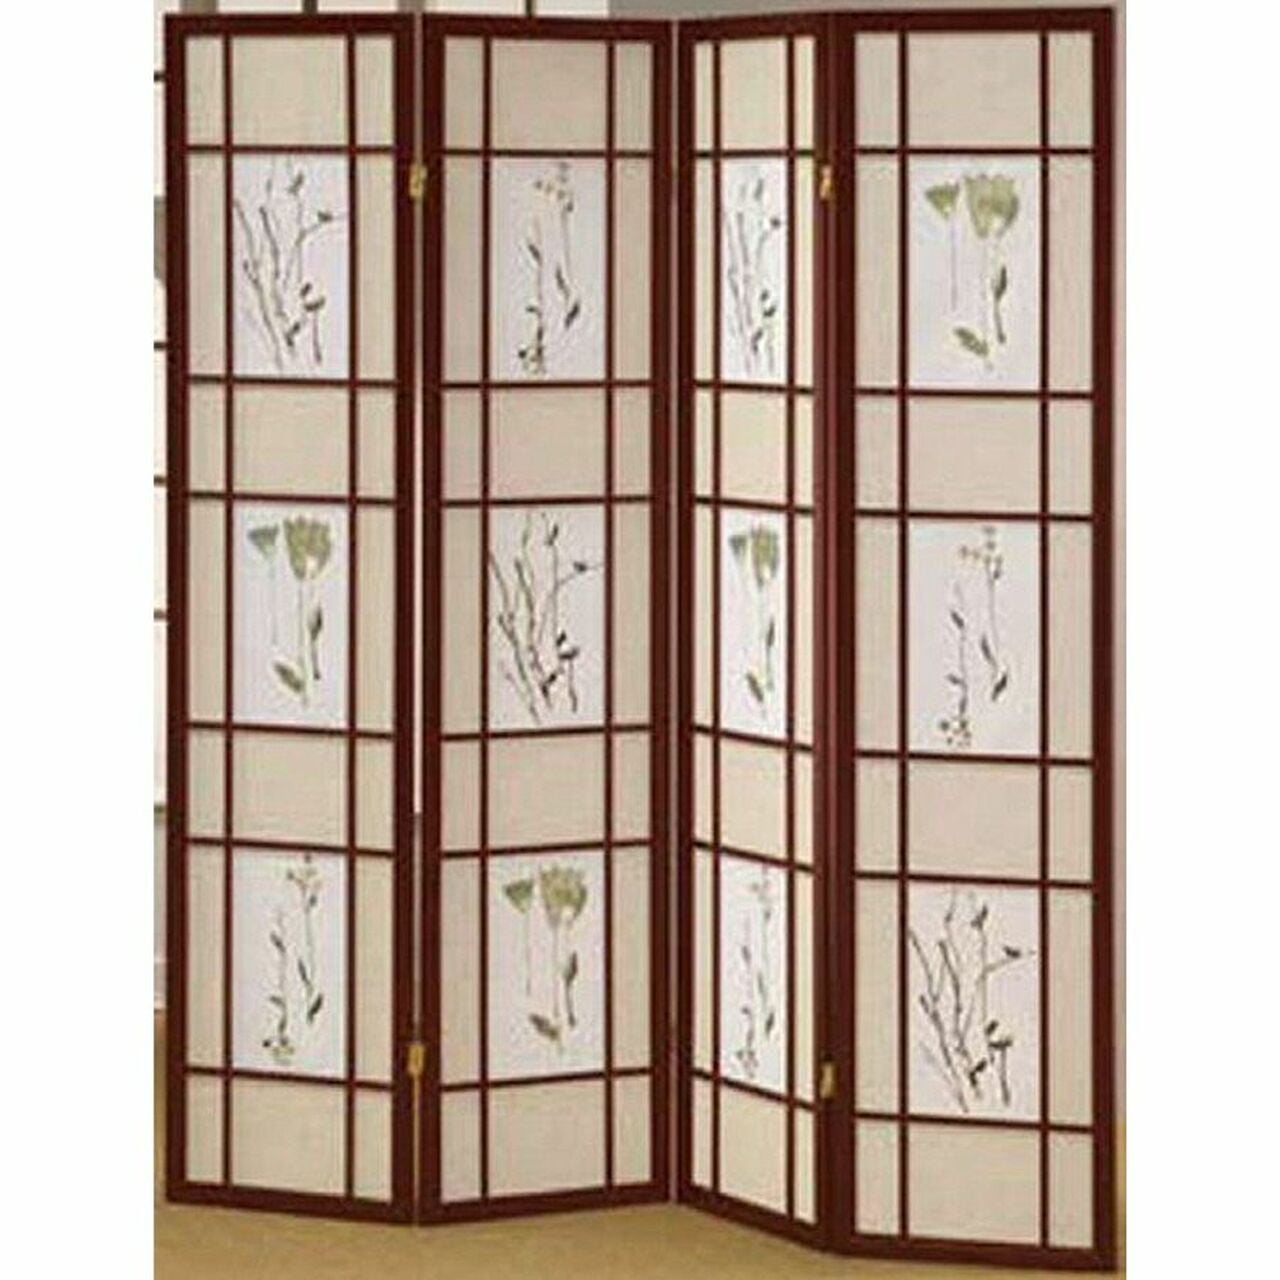 Coaster Oriental Floral Accented 4-Panel Room Screen Divider,Cherry Wood Framed 